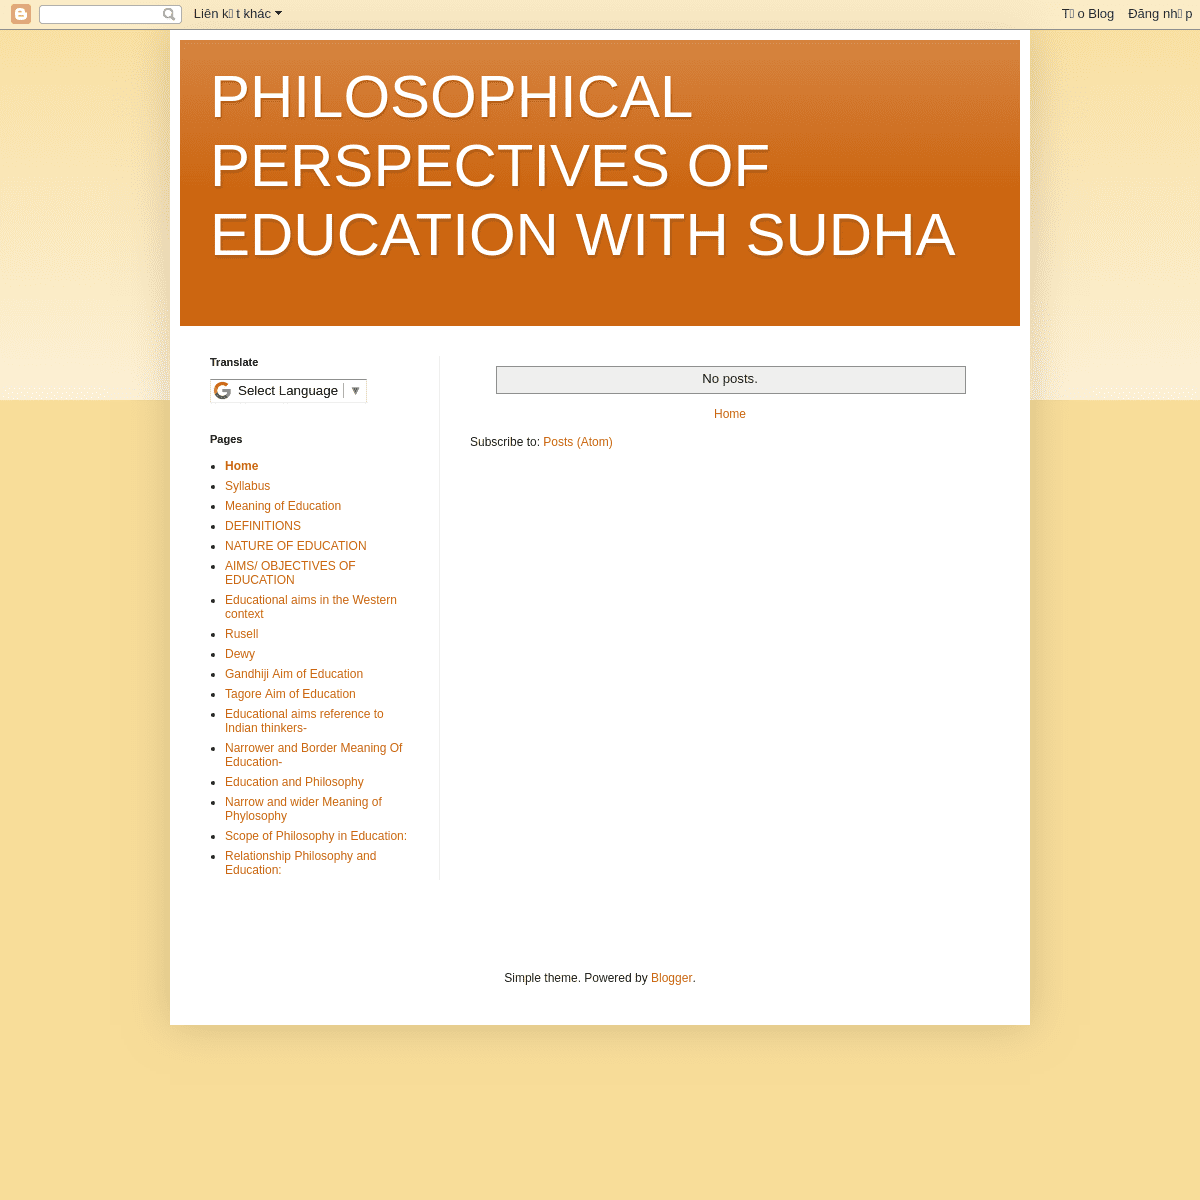 PHILOSOPHICAL PERSPECTIVES OF EDUCATION WITH SUDHA